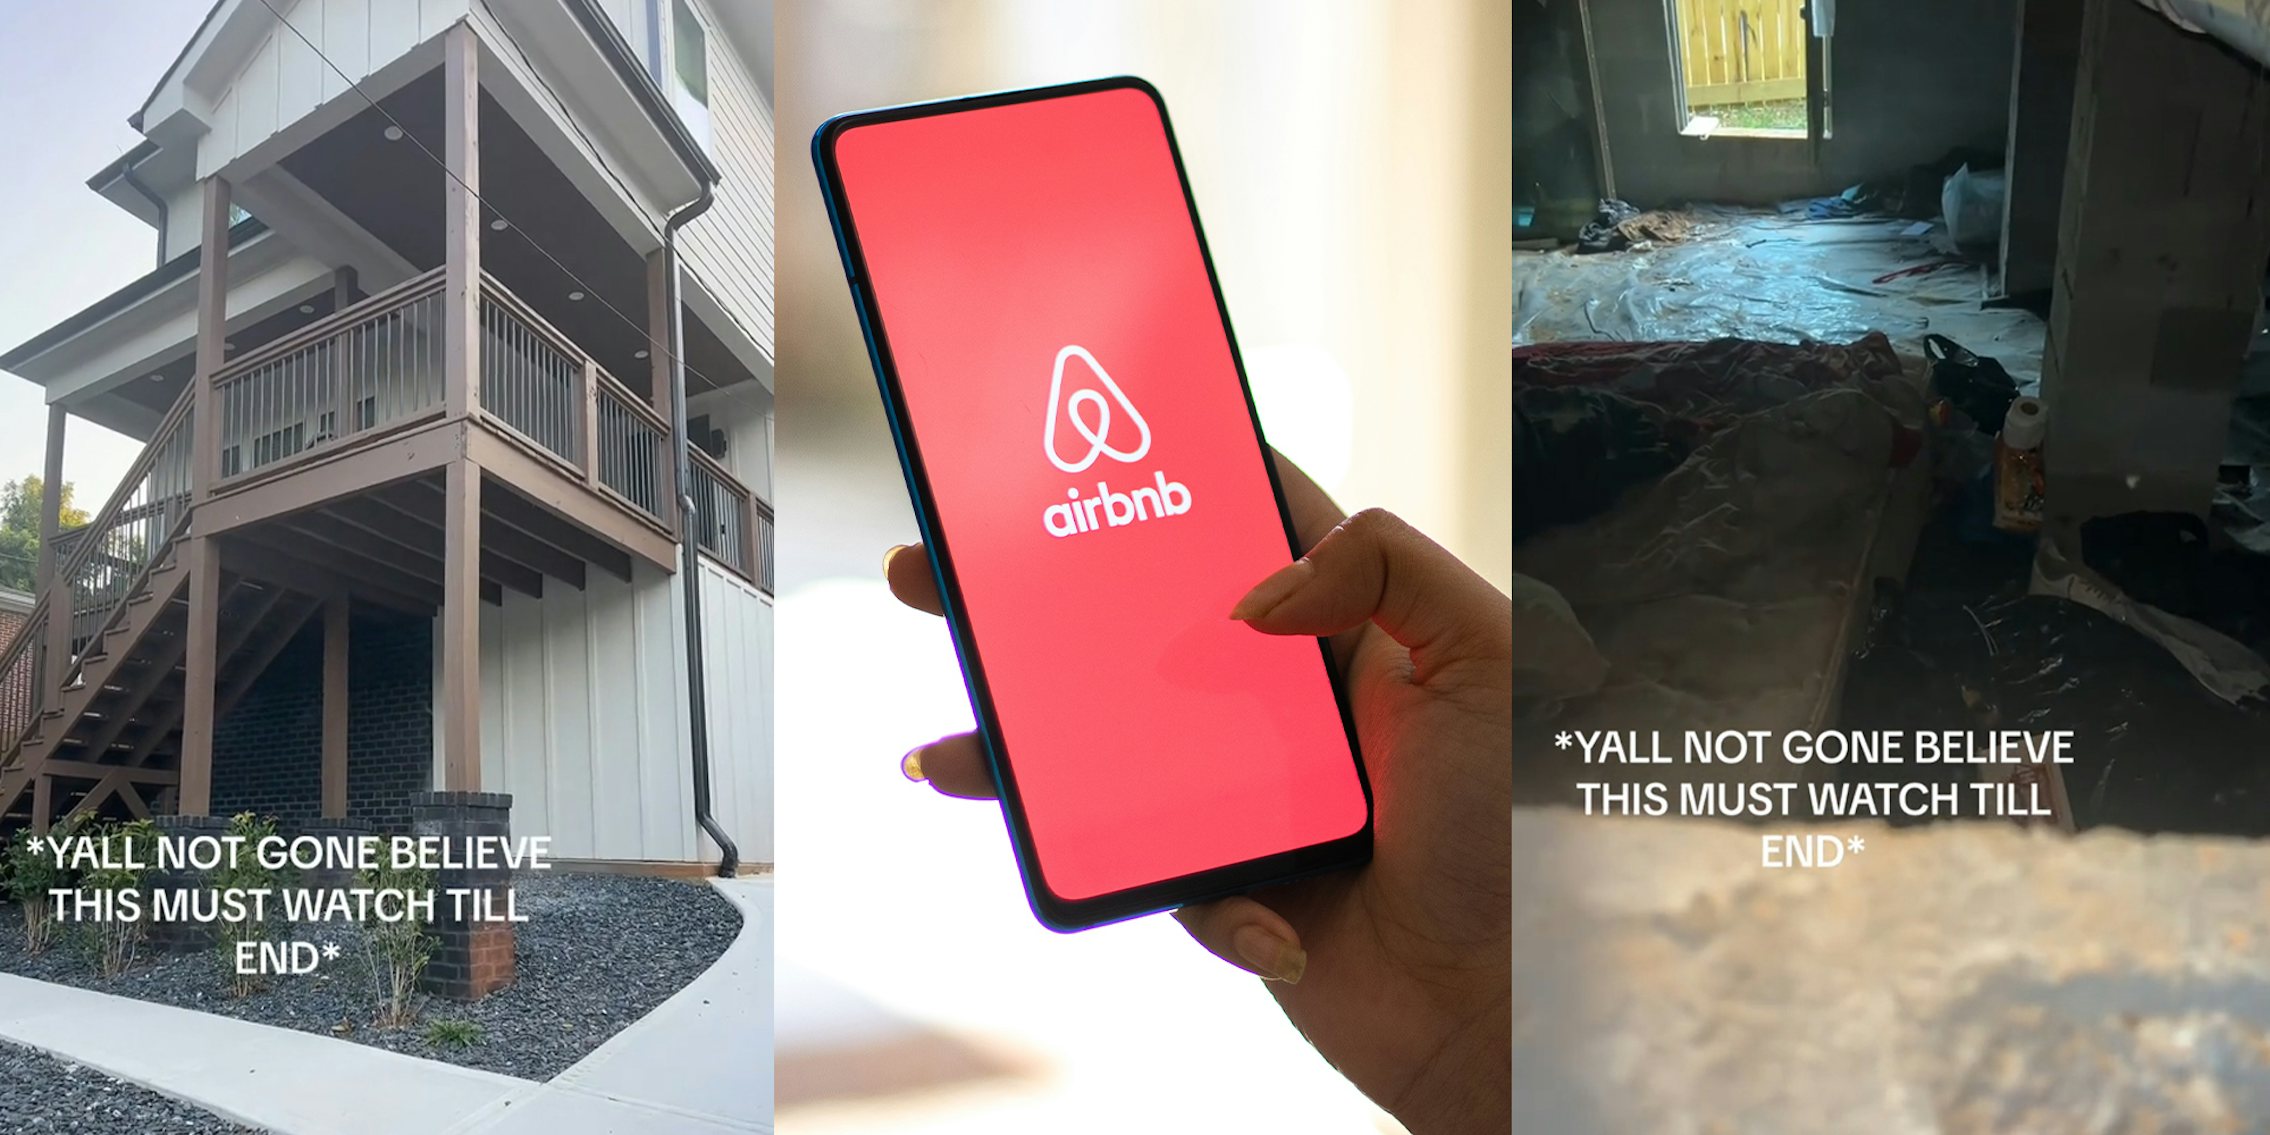 Guest discovers man living underneath their Airbnb rental. The property manager says they didn't know about it